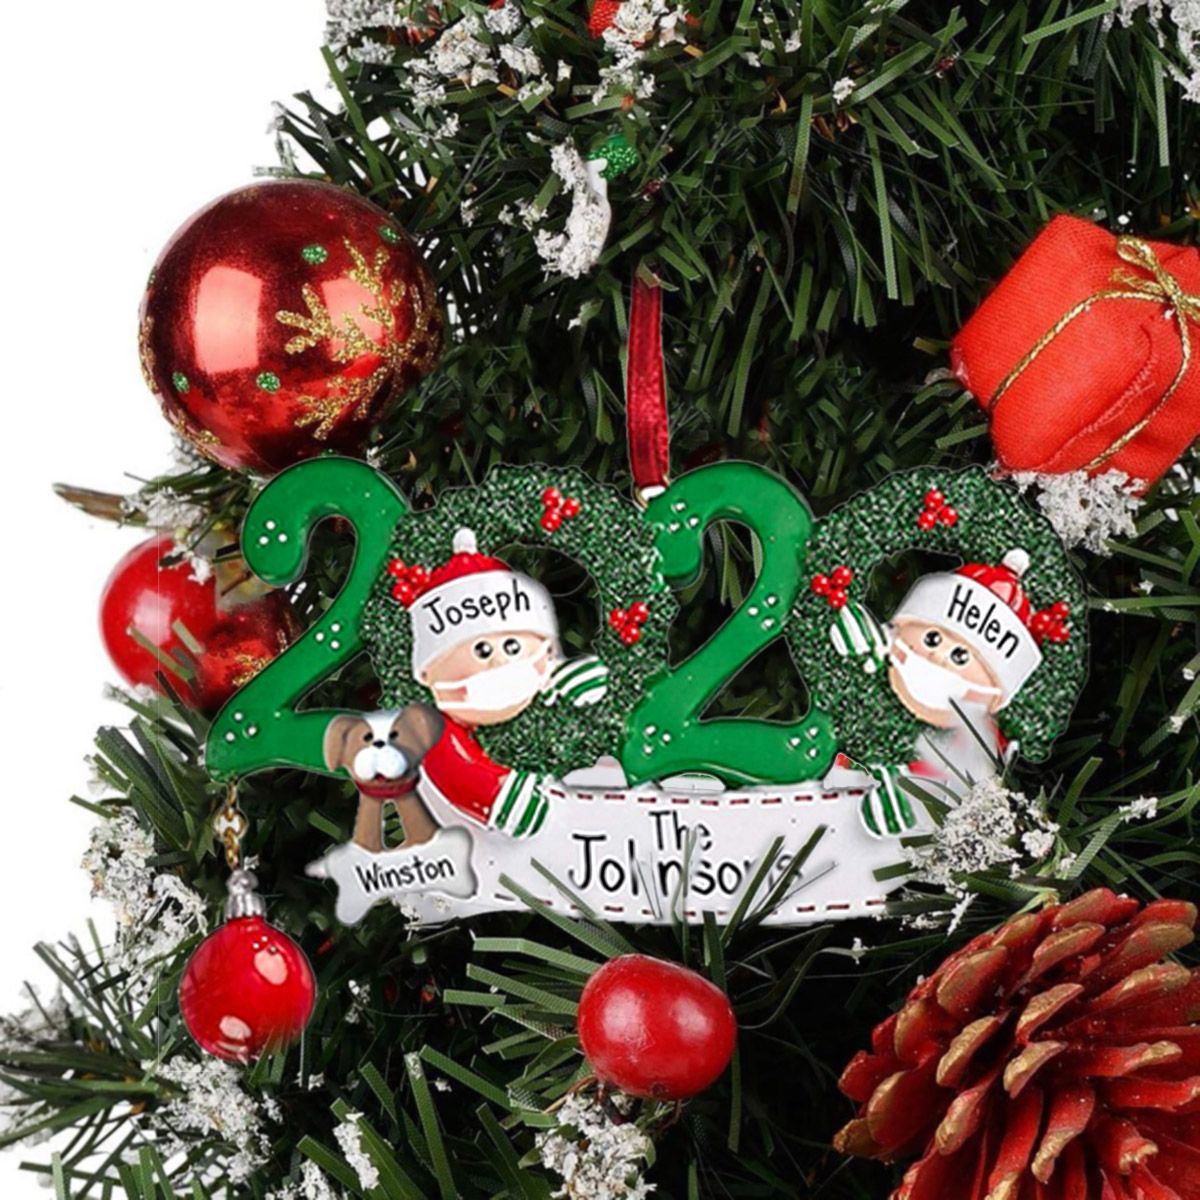 2020-Christmas-Birthdays-Party-Decoration-Gift-Personalized-Hanging-Ornaments-1752686